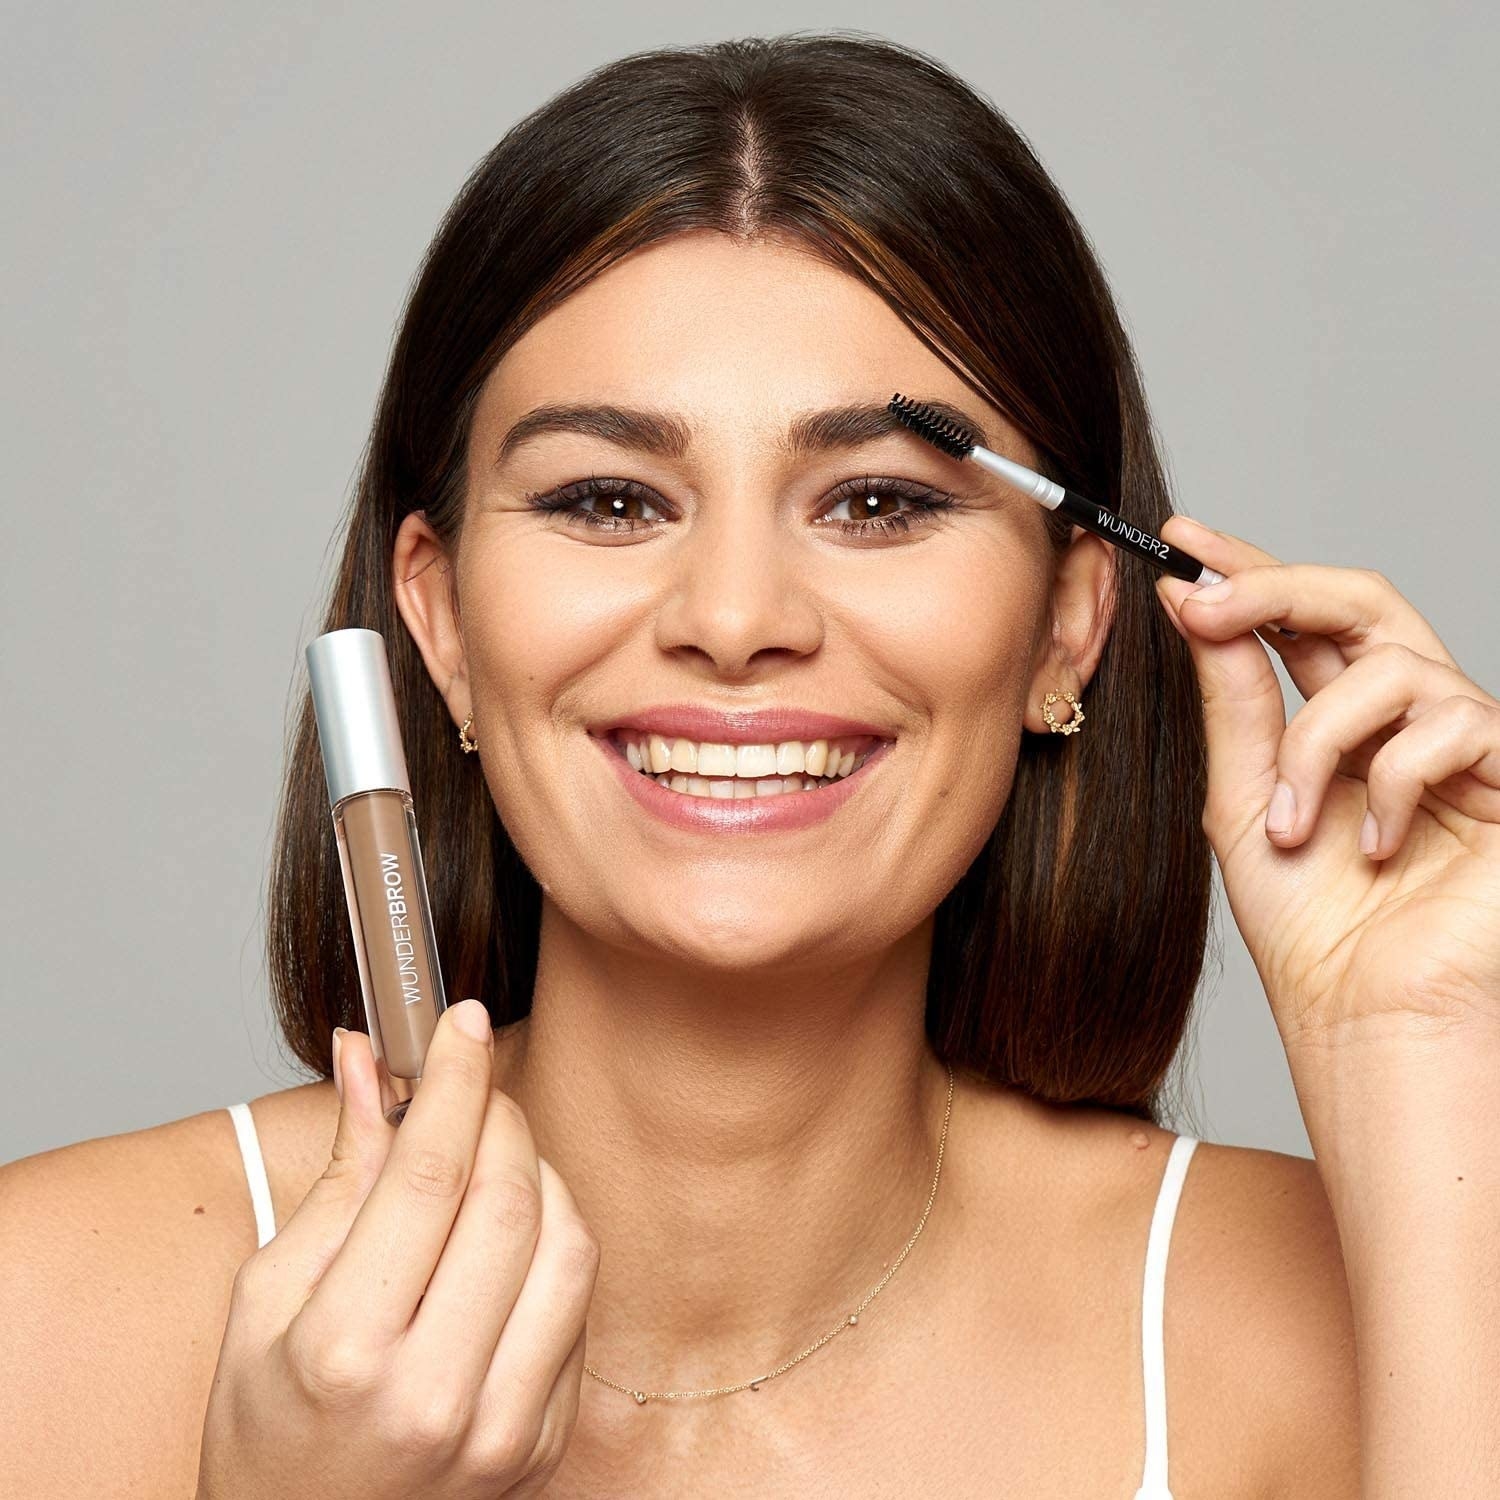 a smiling person using the brow gel on their eyebrows